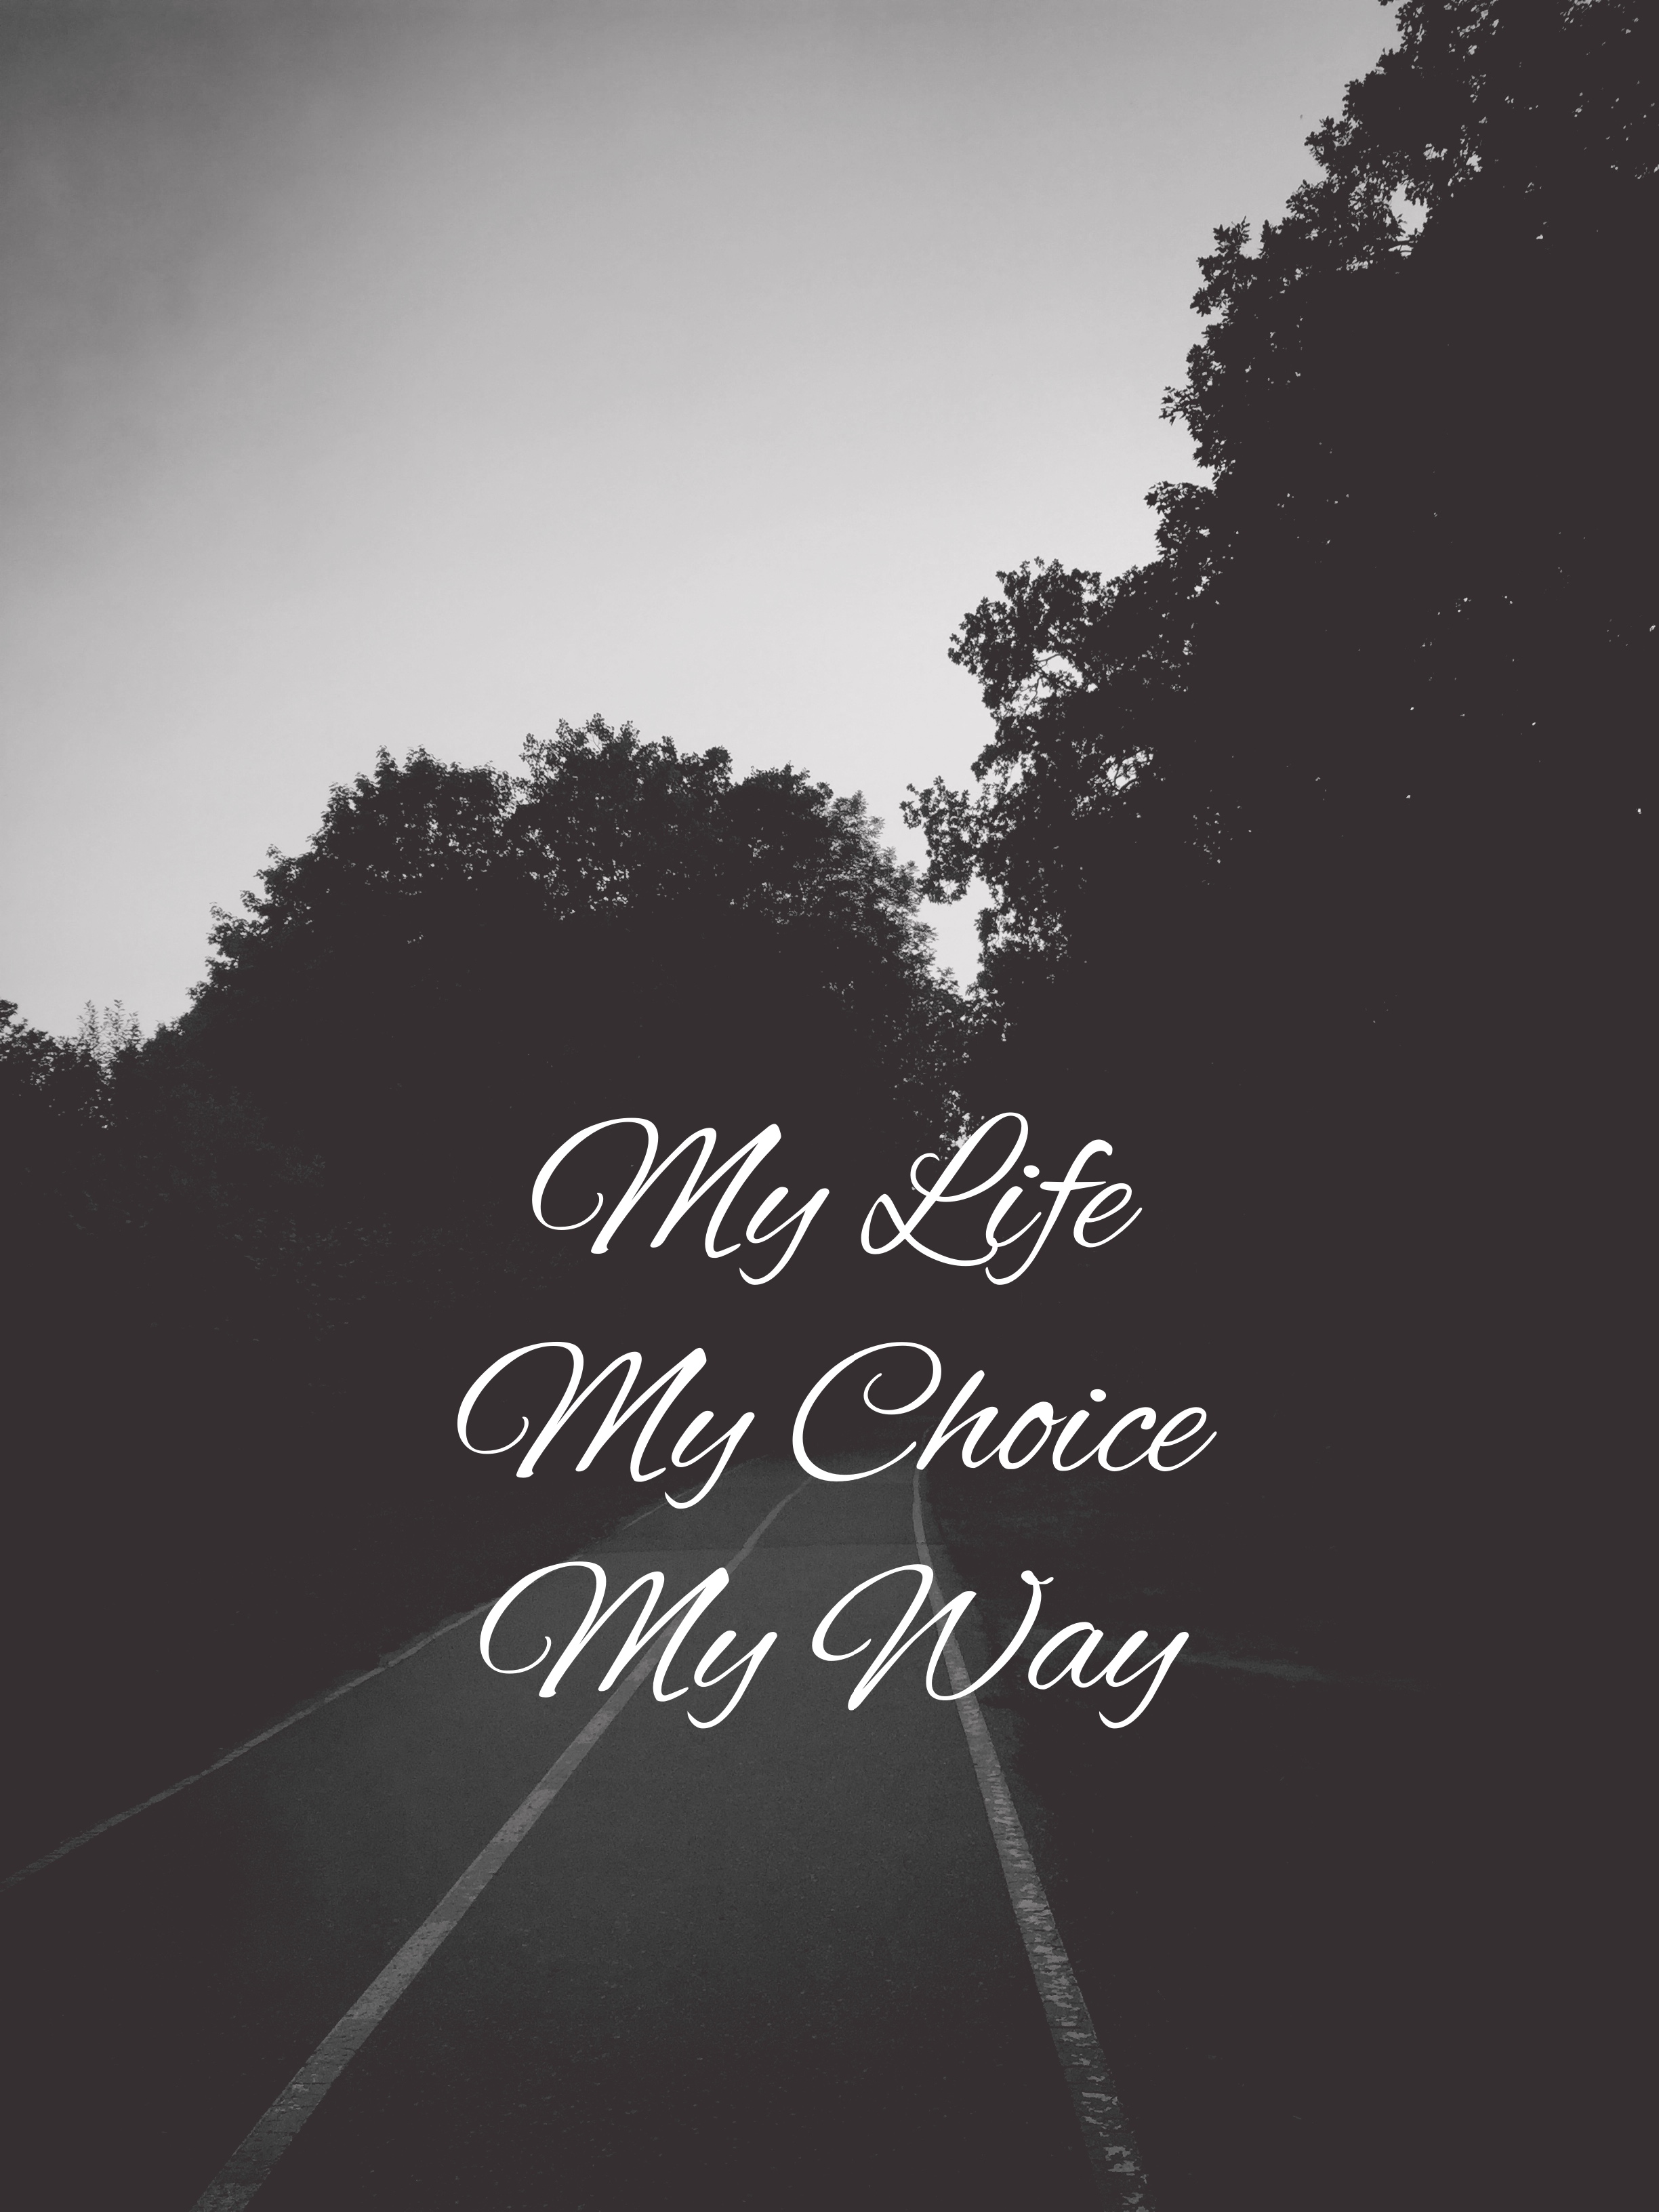 vertical wallpaper words, quotation, quote, bw, text, chb, inscription, road, path, way